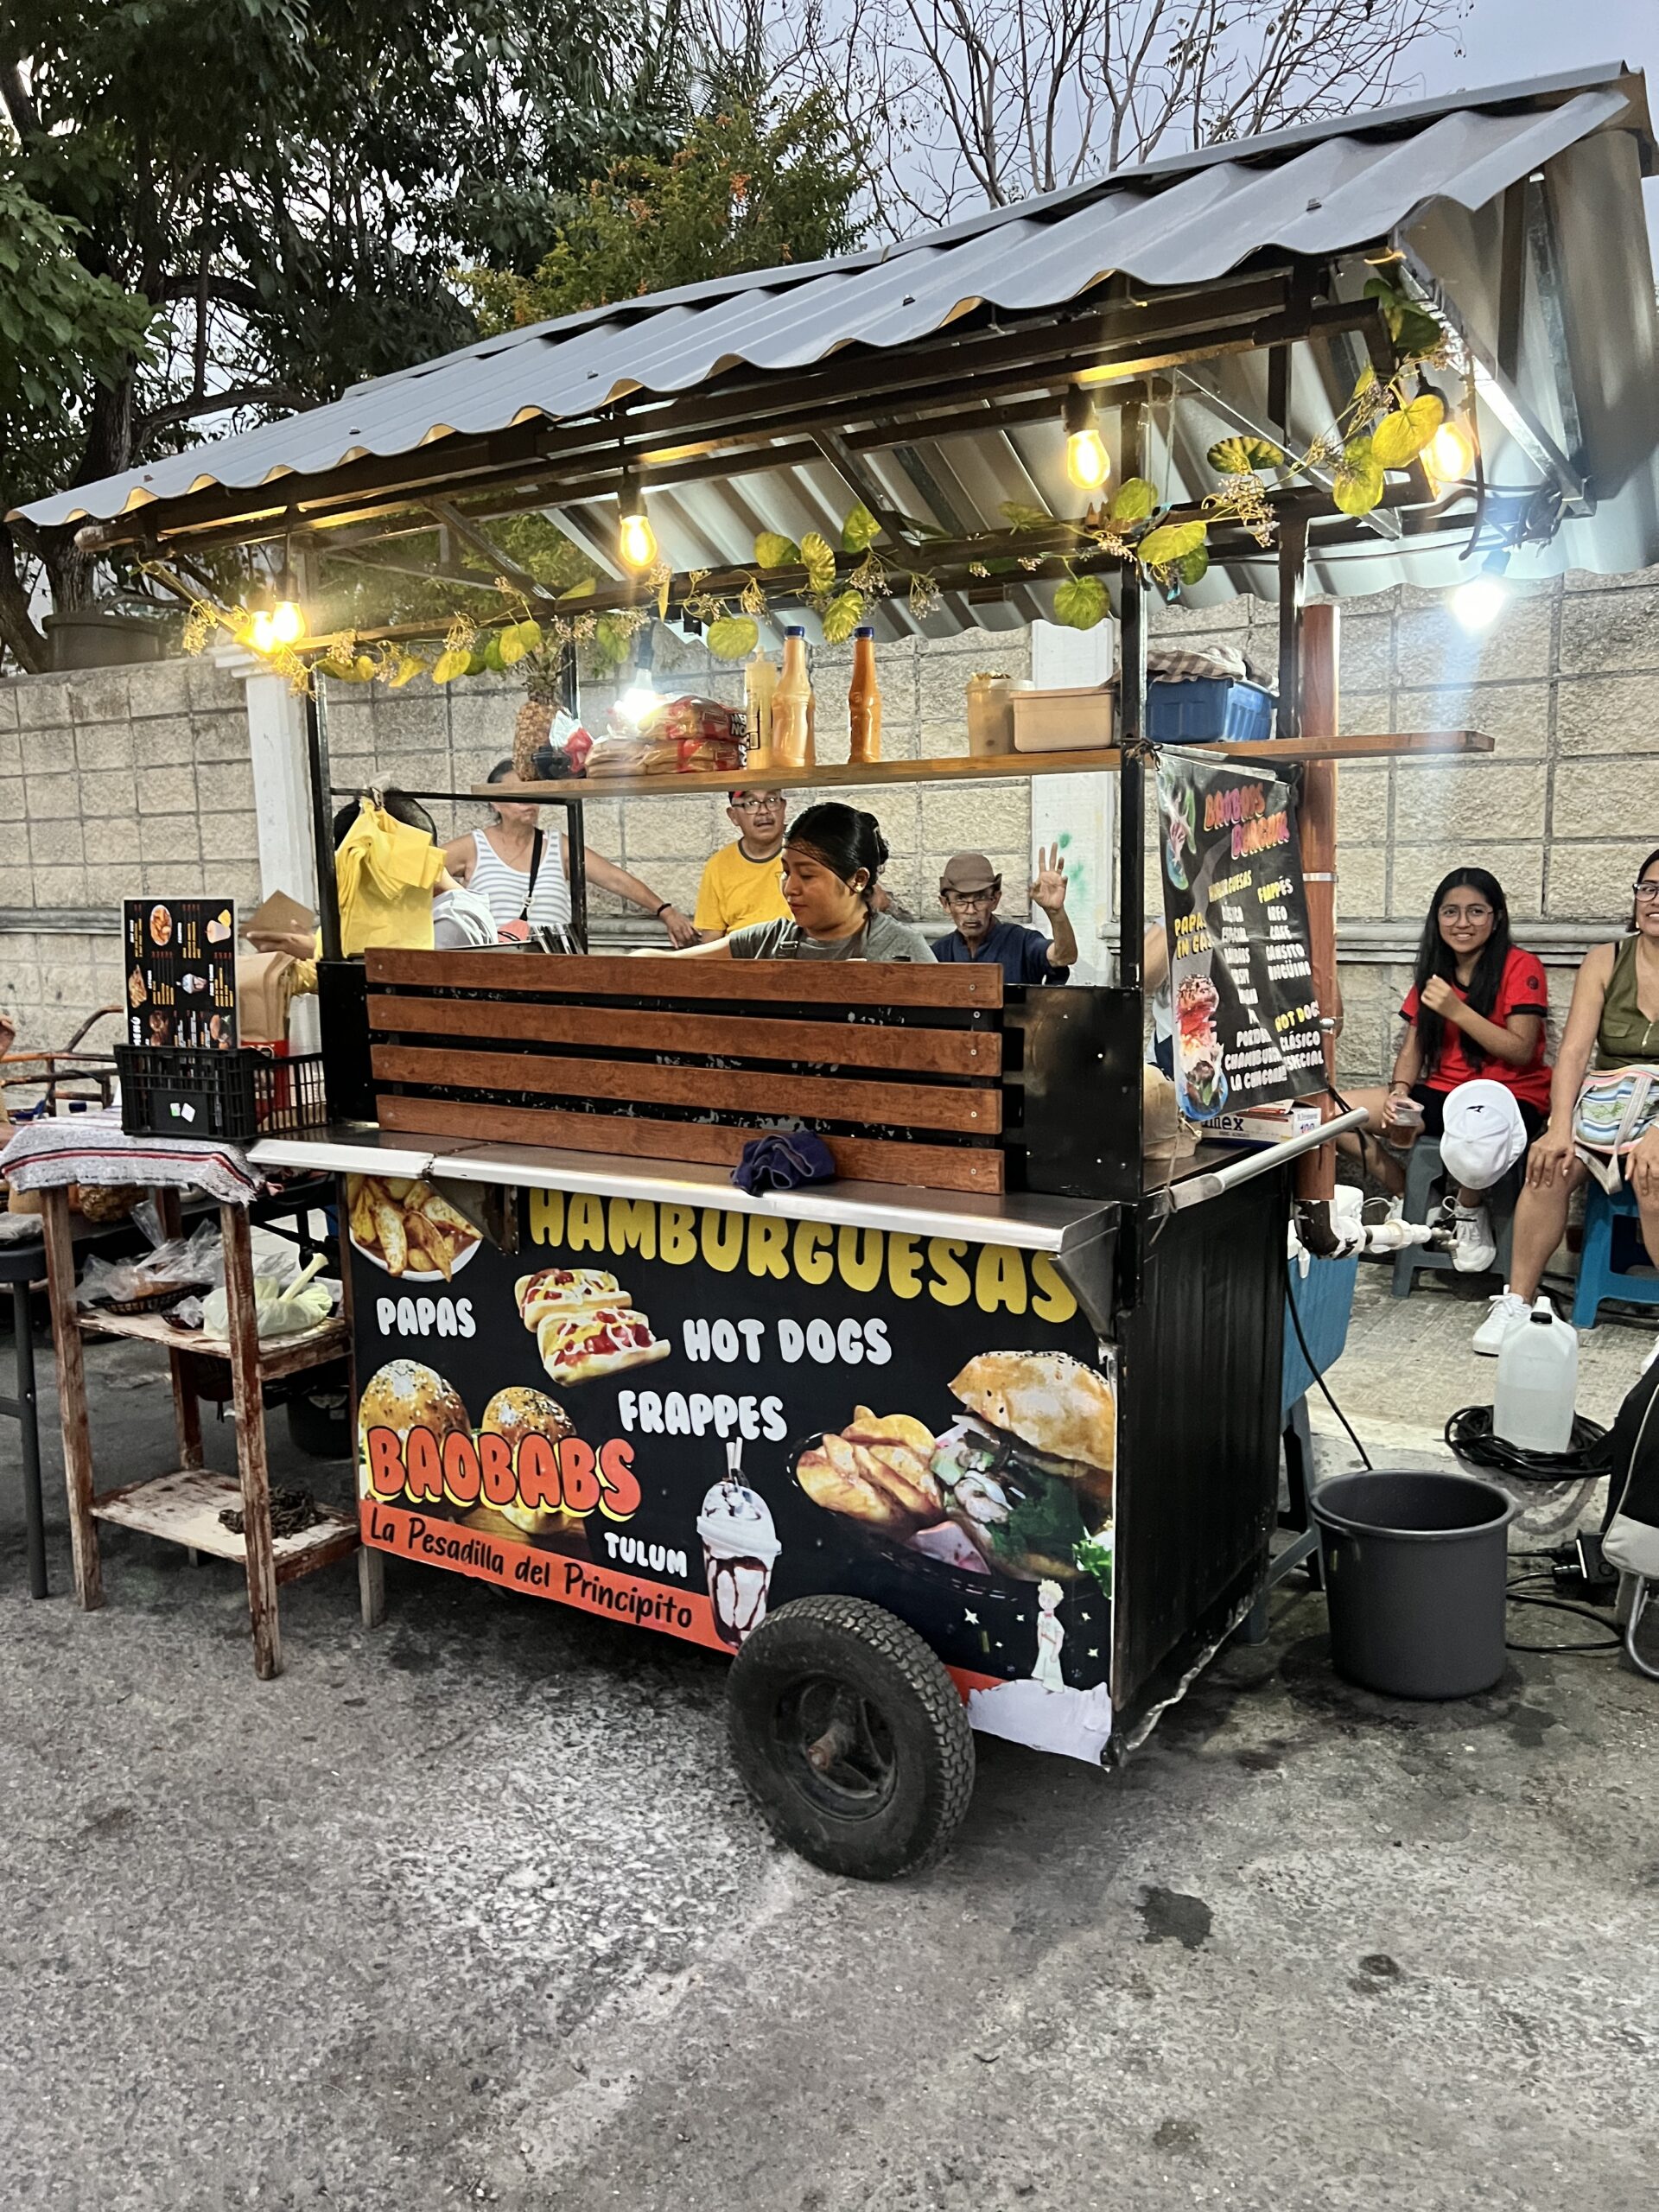 Monthly Cost Of Living In Tulum Mexico $2 Dollars For 5 Street Tacos